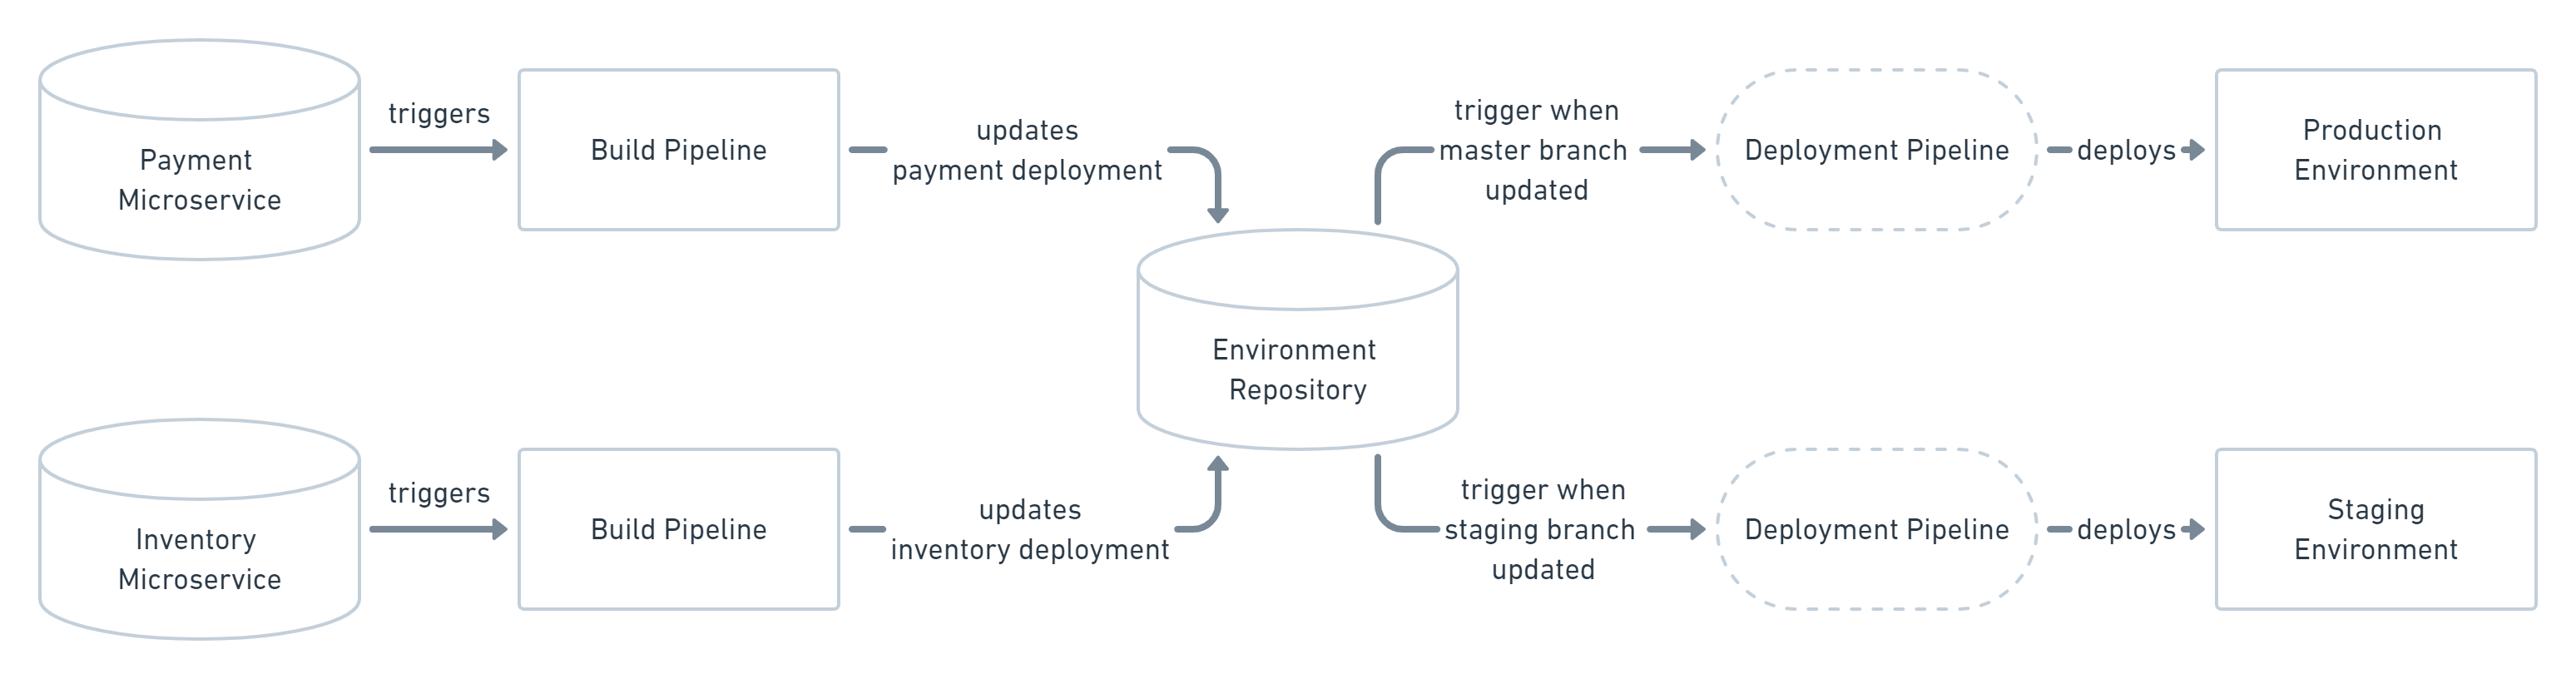 Multiple applications and environments